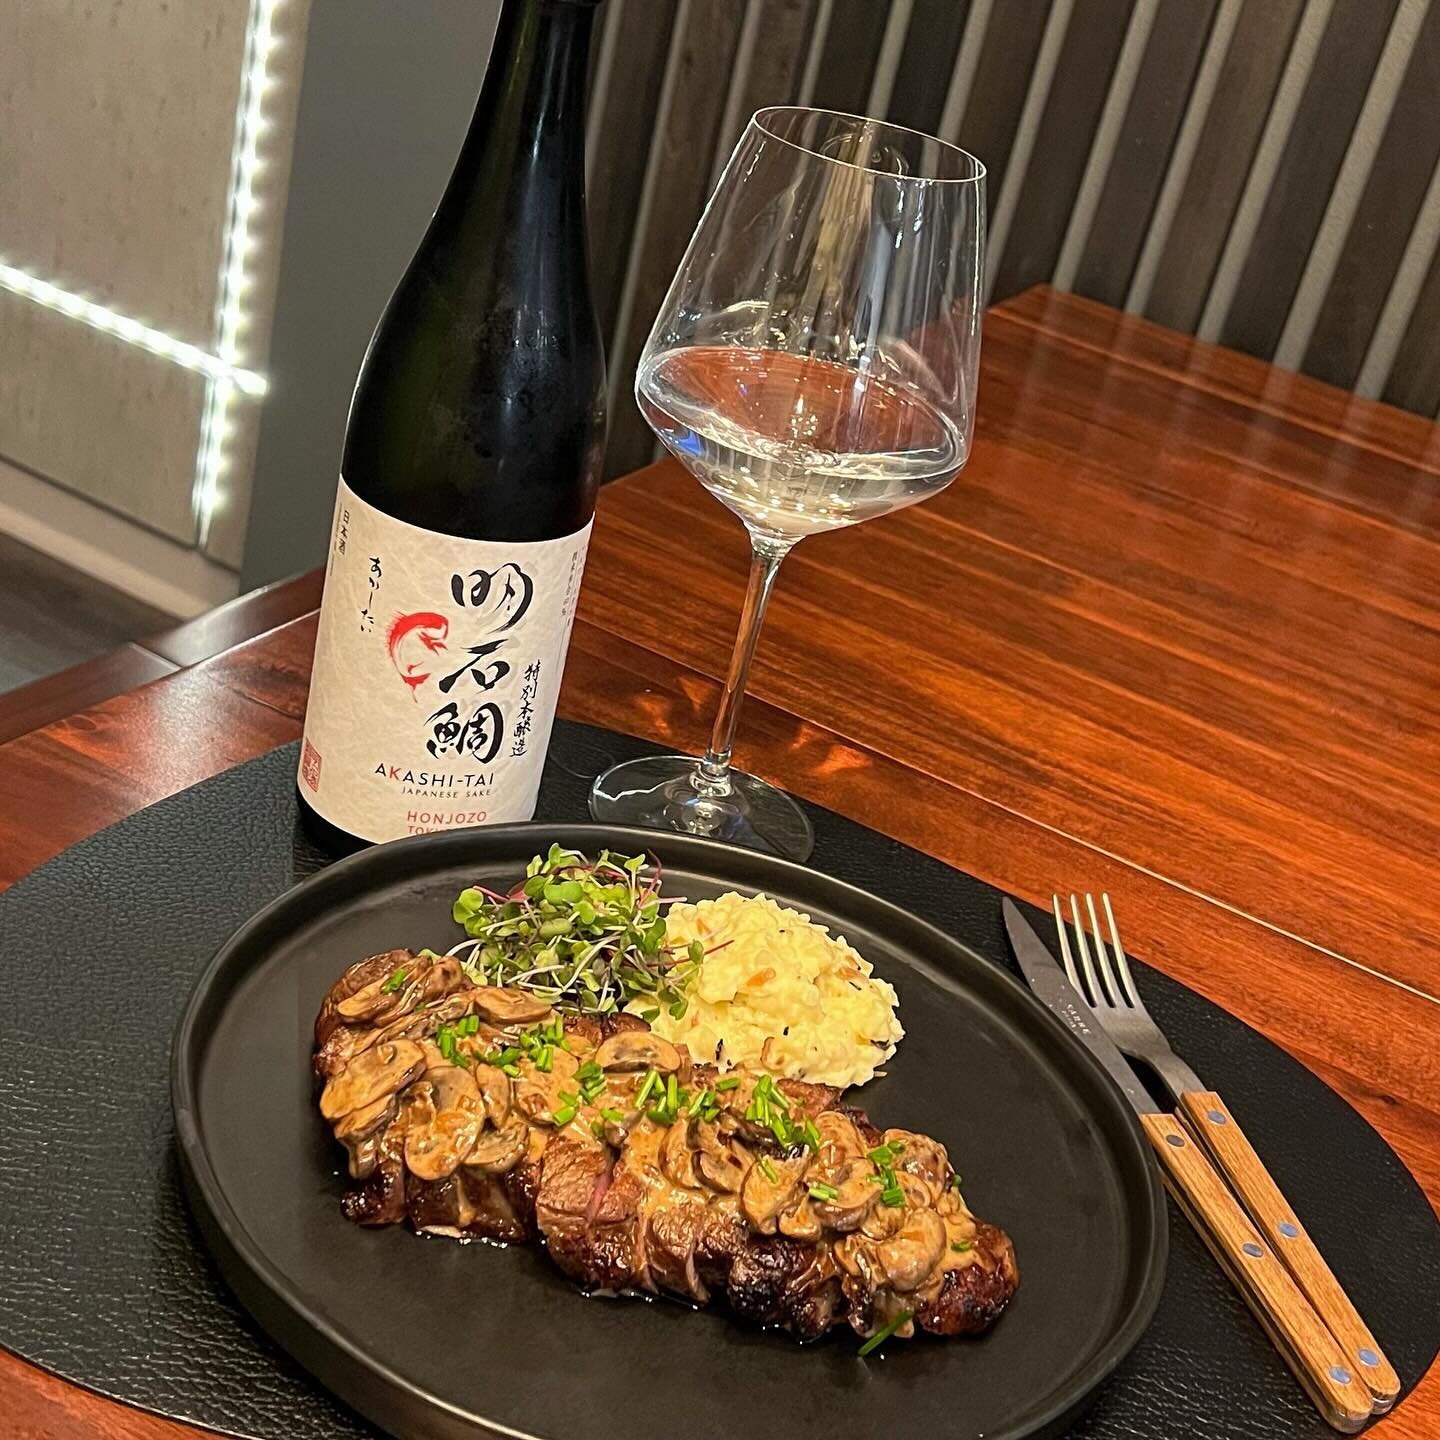 &bull; | &bull; Monday joy. Prime rib eye with mushroom jus and a side of truffle mashed potatoes. Paired with clean and savoury Akashi-Tai Tokobetsu Honjozo.

A lighter-bodied sake to which the sake master adds a small amount of alcohol prior to the